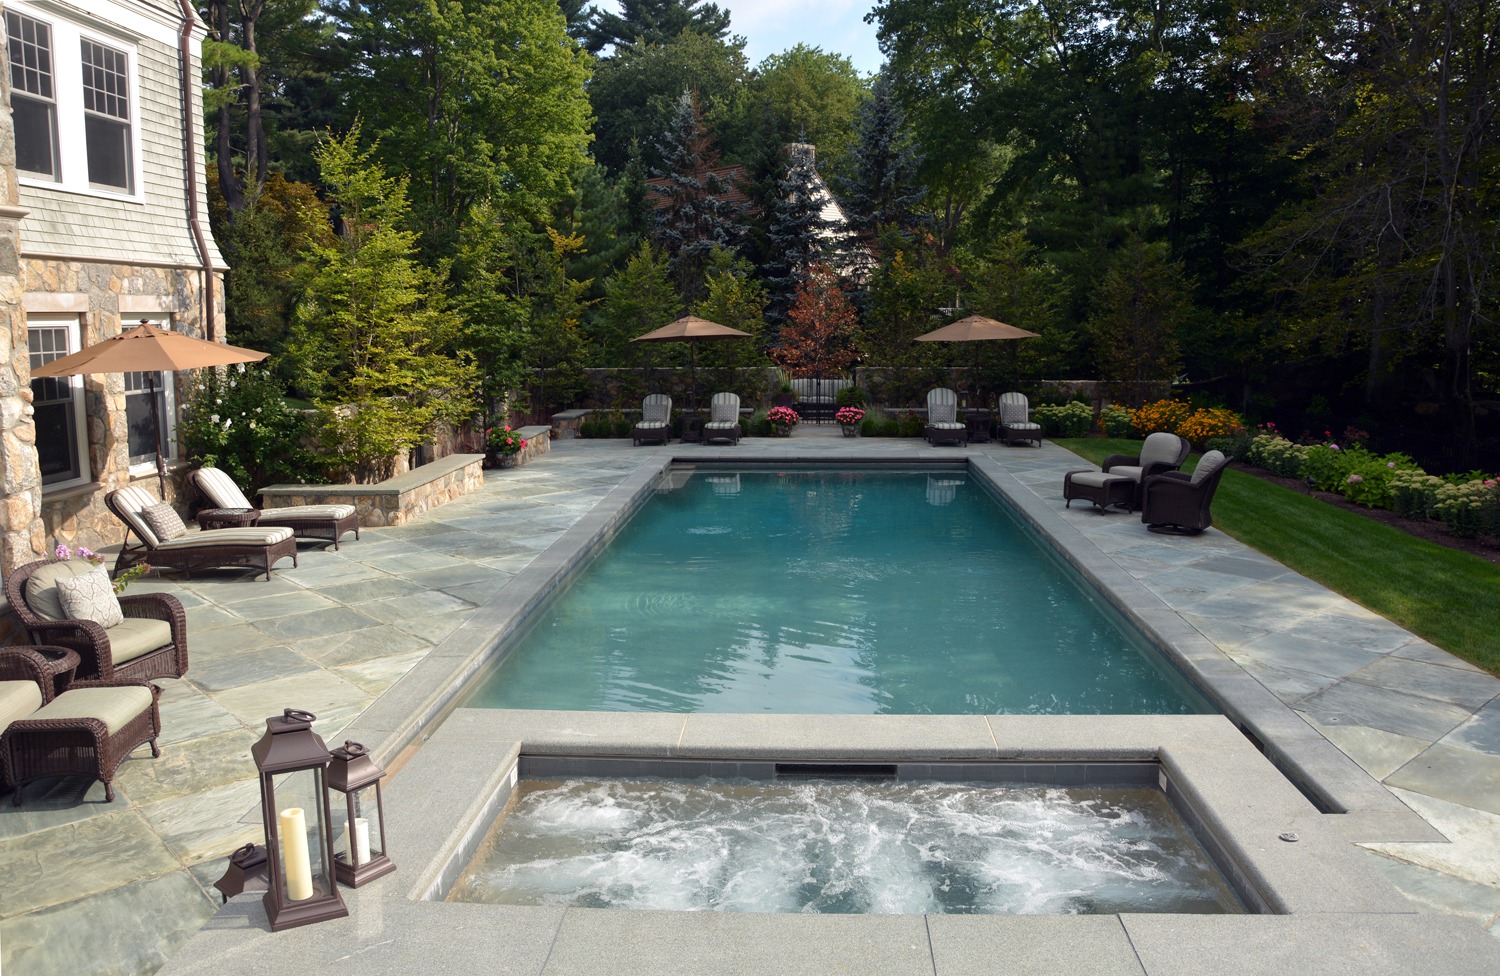 An elegant outdoor pool with an attached hot tub, flanked by lounge chairs and umbrellas, set against a backdrop of lush greenery and a stone house.